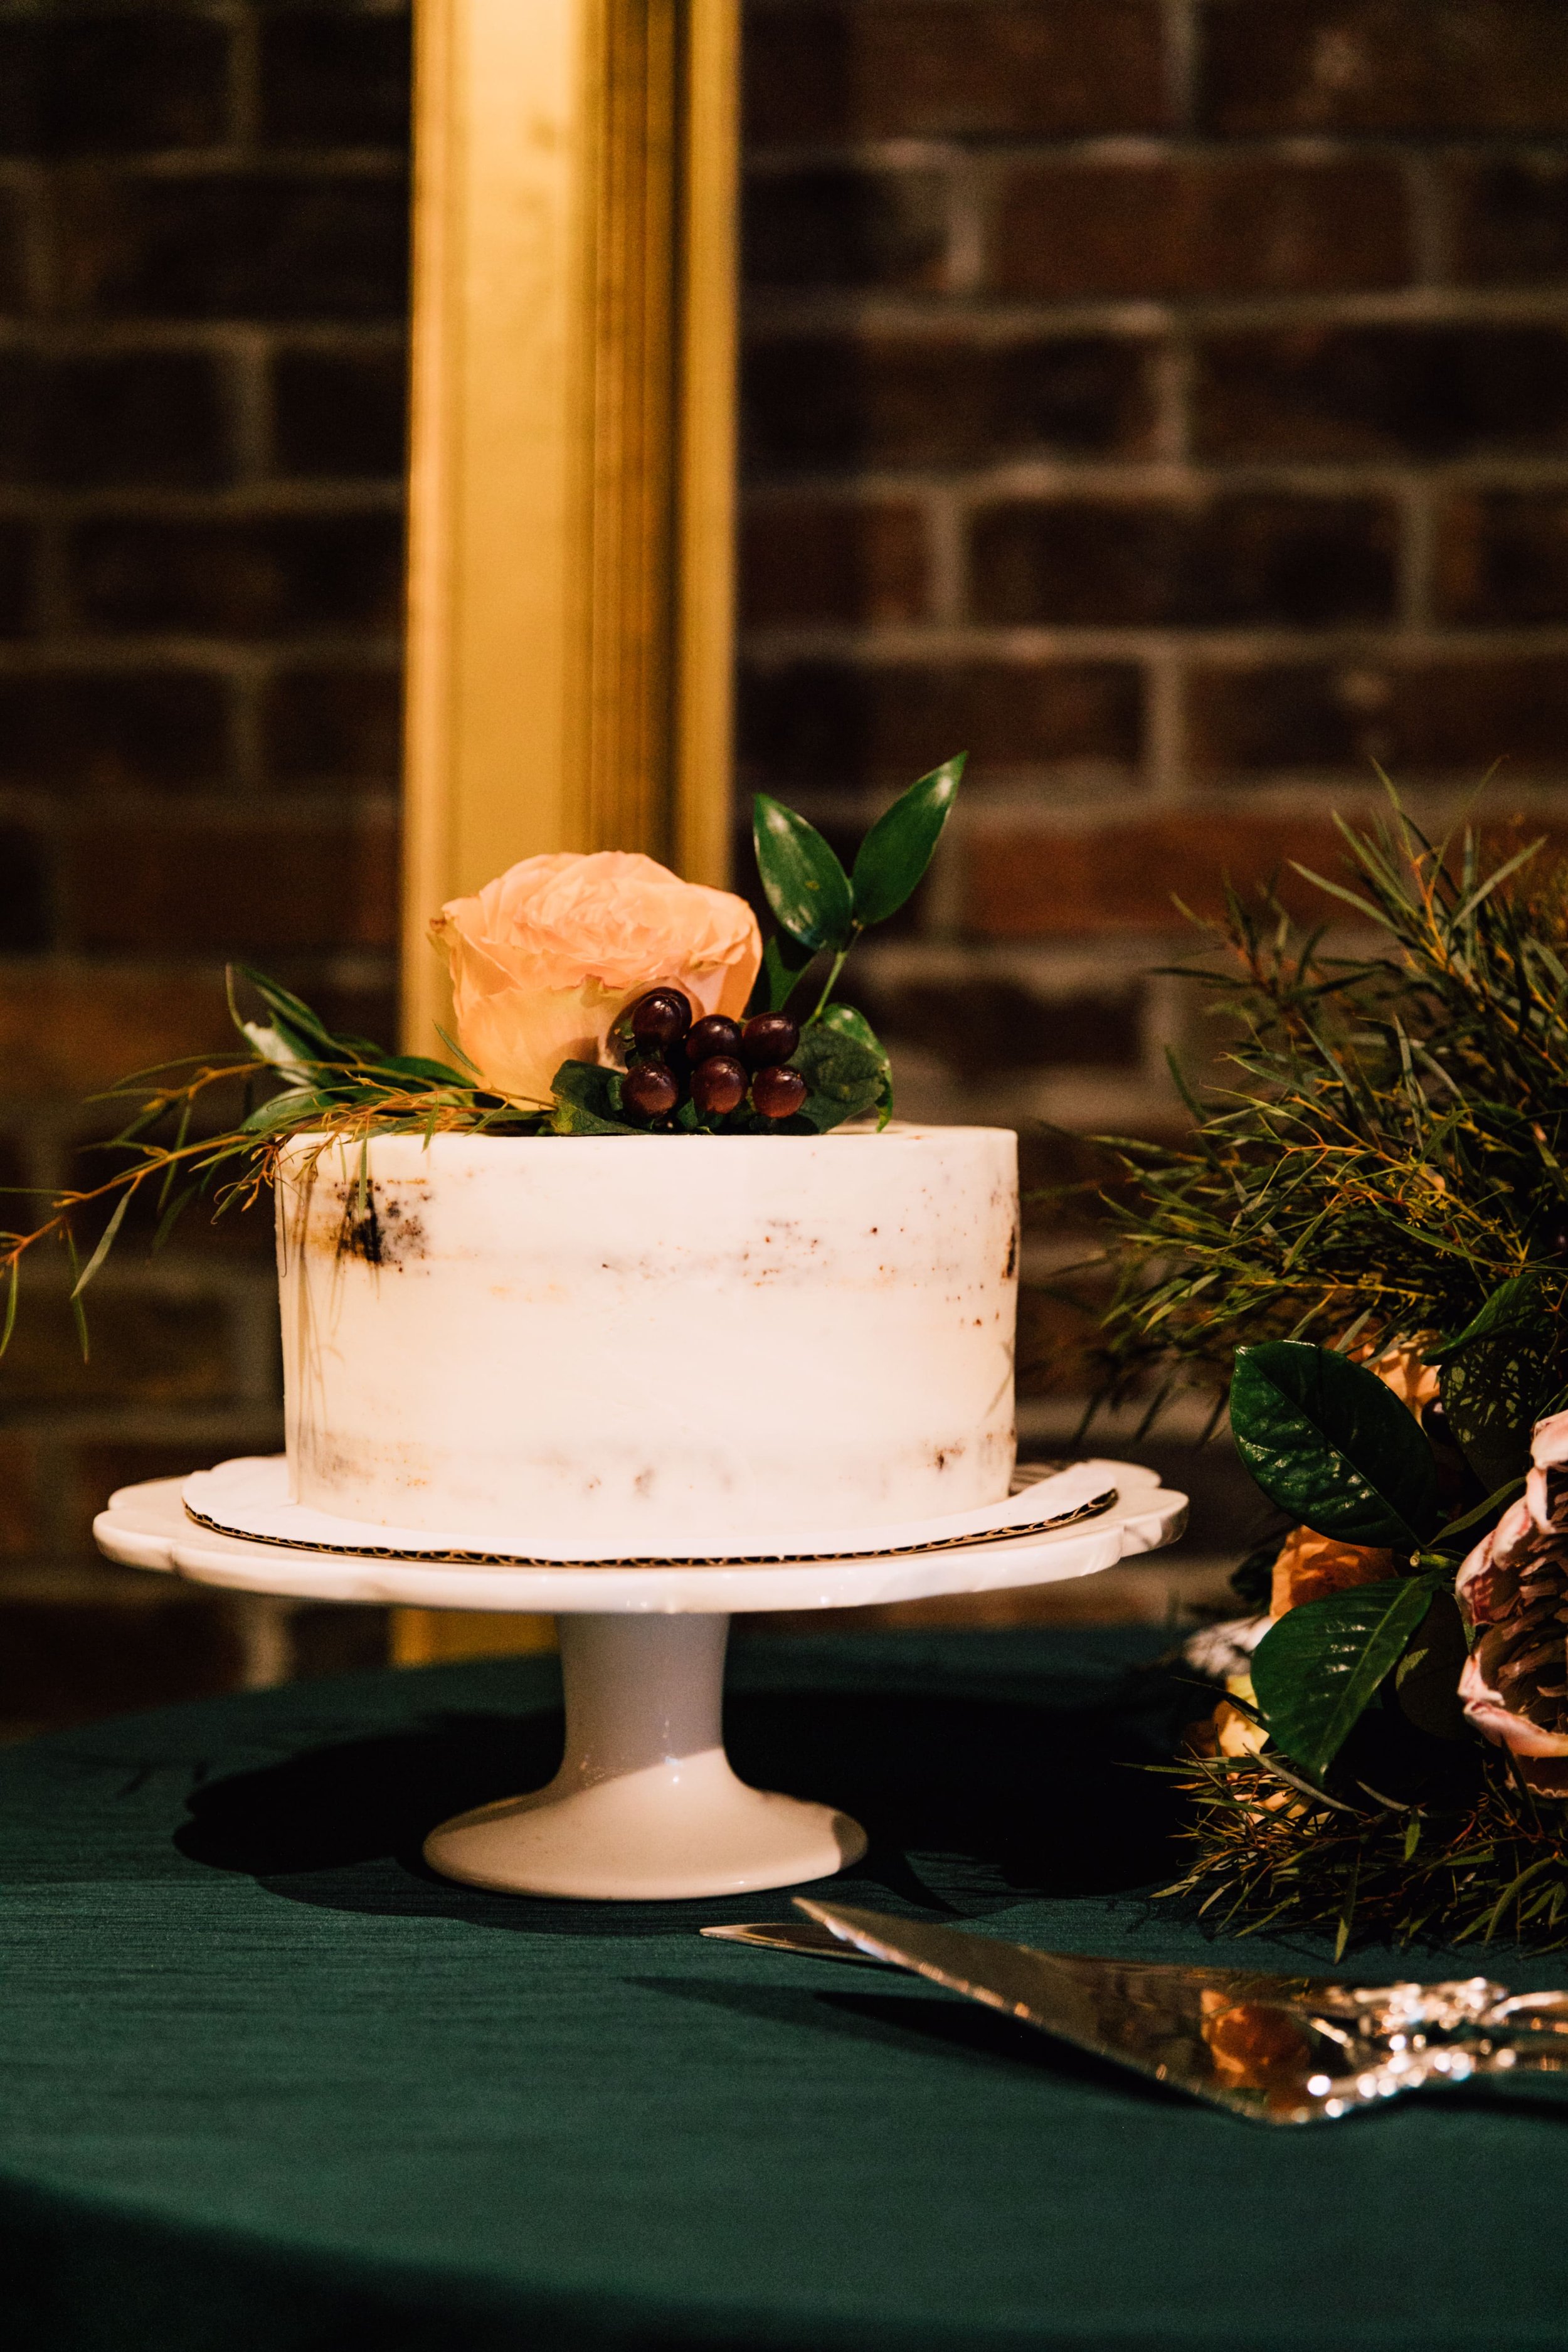  syracuse ny photographer captured a photo of a simple wedding cake from a fall wedding. it is a simple naked cake with flowers and berries resting on top 